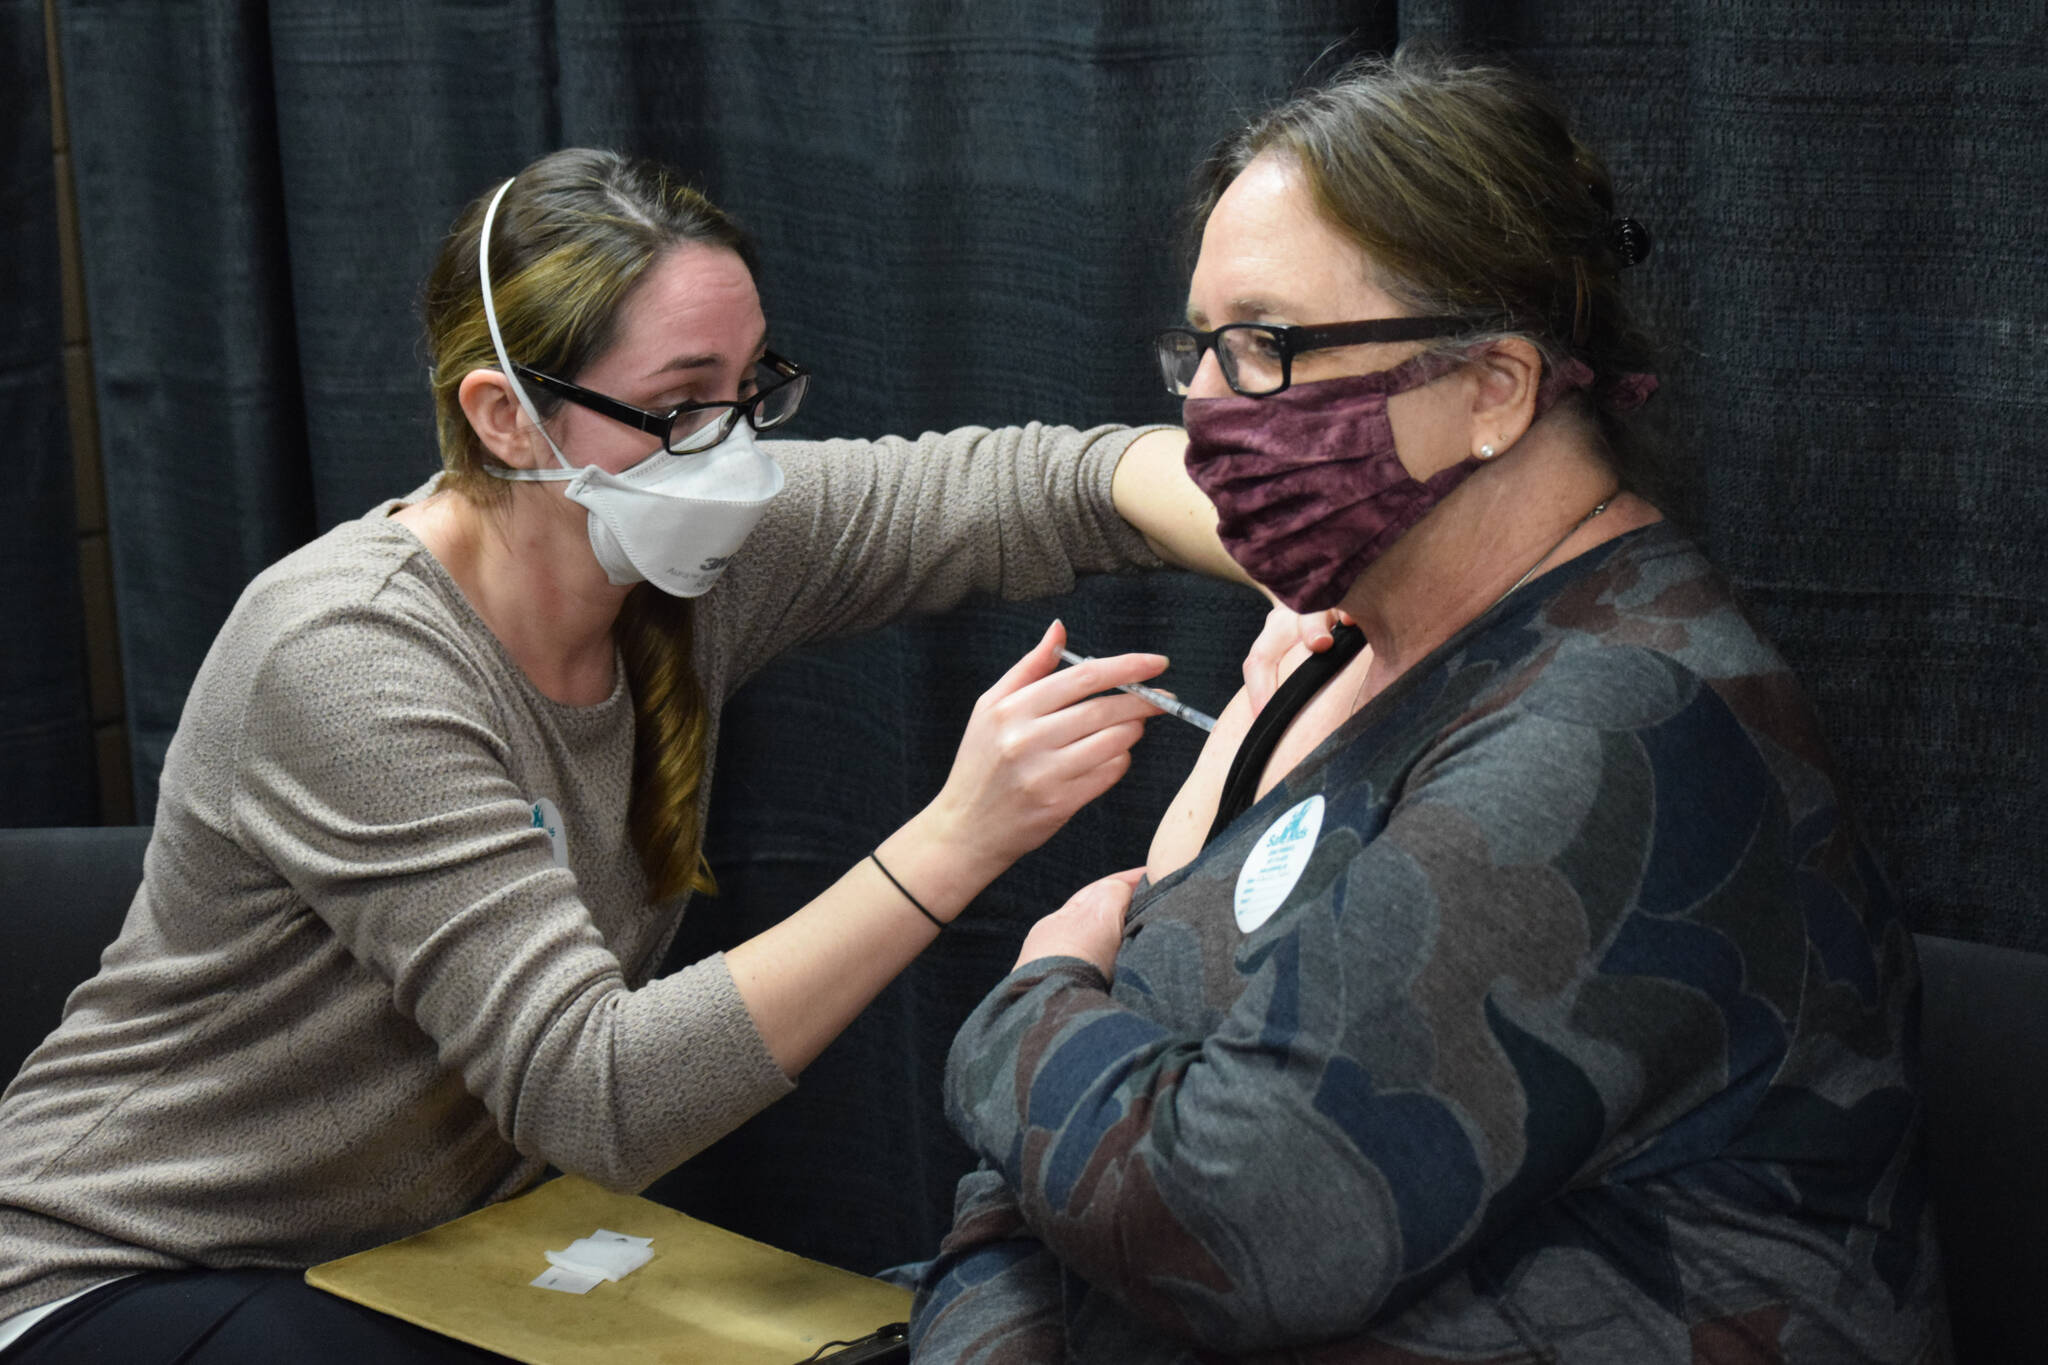 Kenai Public Health Nurse Sherra Pritchard gives Love Inc. Director Leslie Rohr a COVID-19 booster shot during the Project Homeless Connect event in Soldotna on Wednesday, Jan. 26, 2022. (Camille Botello/Peninsula Clarion)